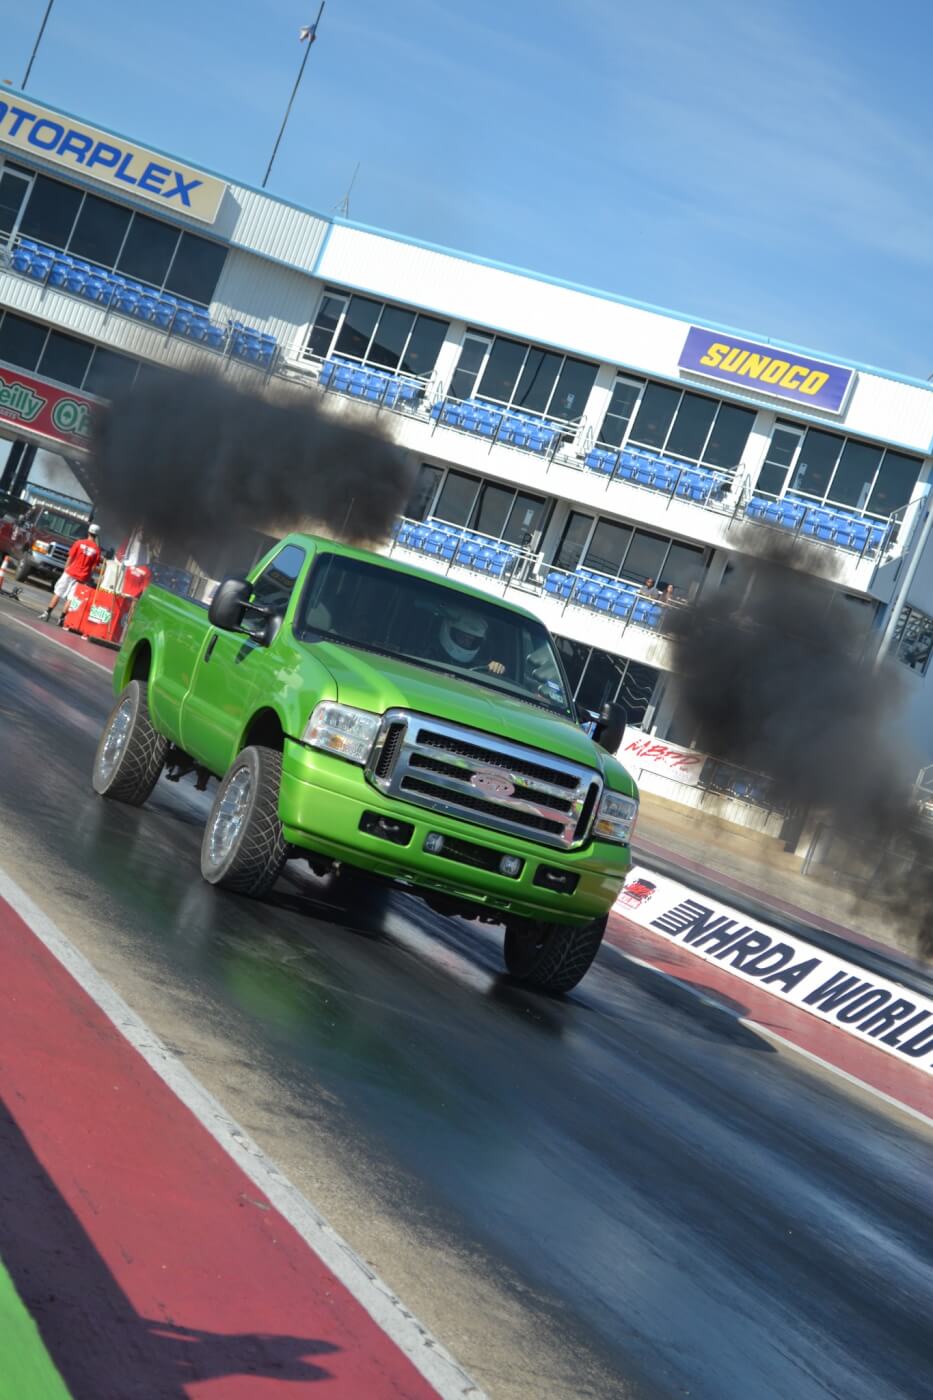 A number of Sportsman and Index Classes were available to competitors, like the 11.90 Super Diesel and 10.90 index classes. This bright green Ford made it a number of rounds in the 11.90 class, which is usually dominated by Dodges and GMs.